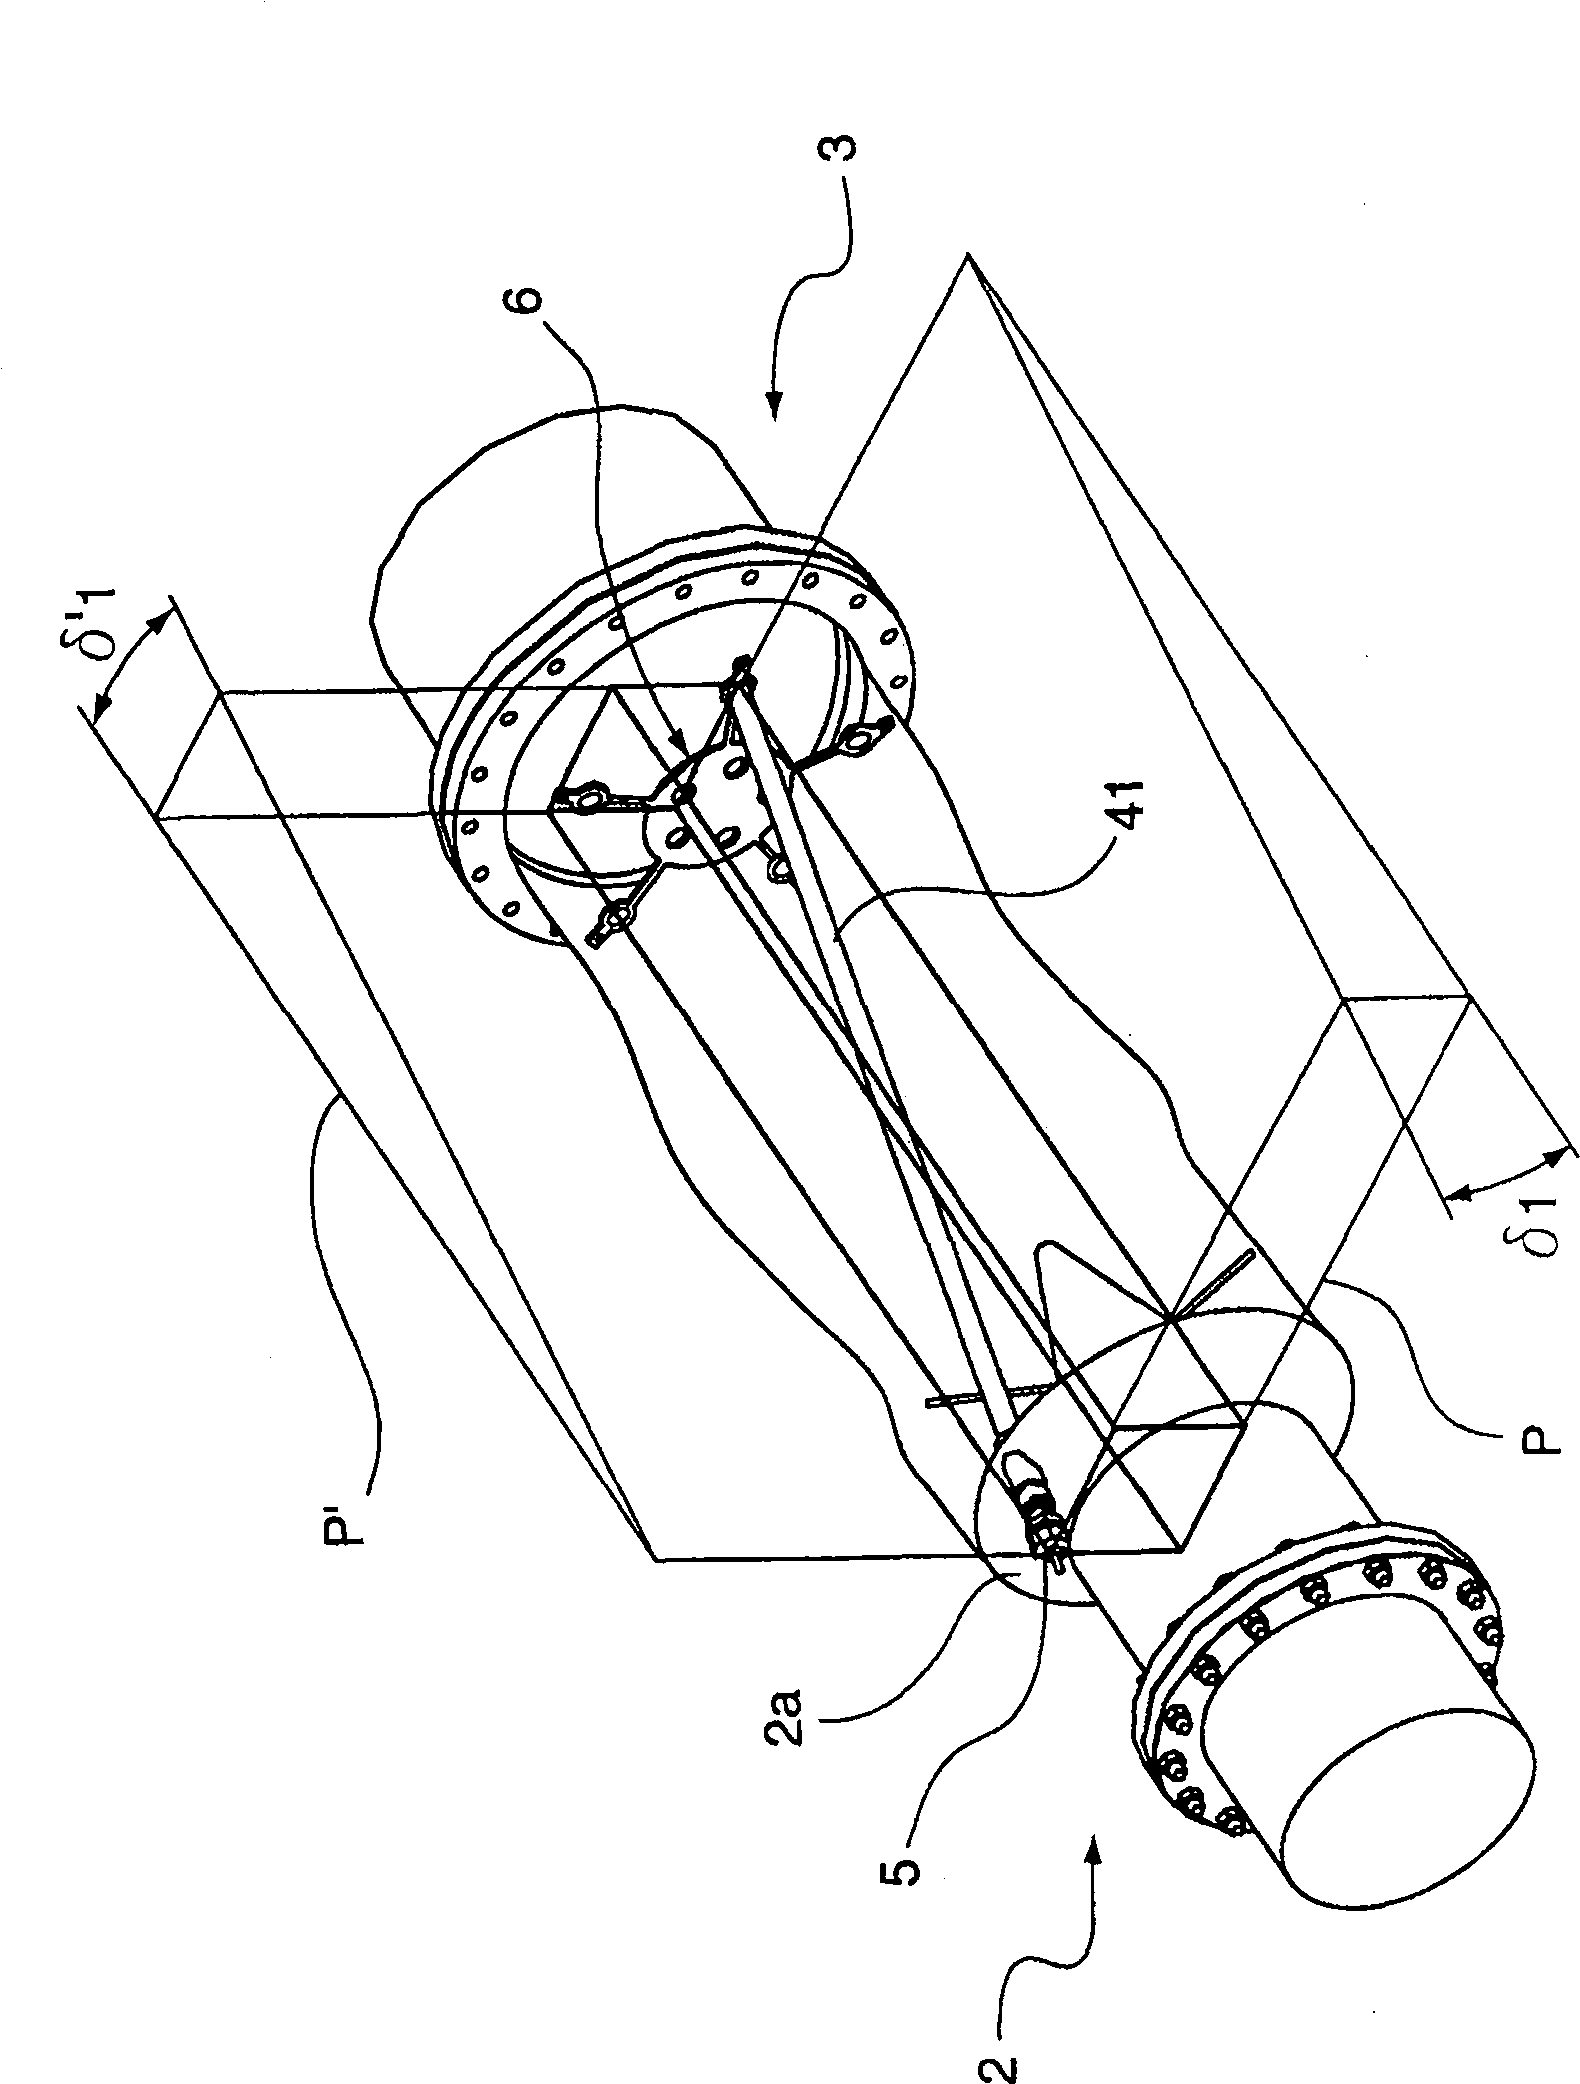 Water treating reactor for the drinkability thereof